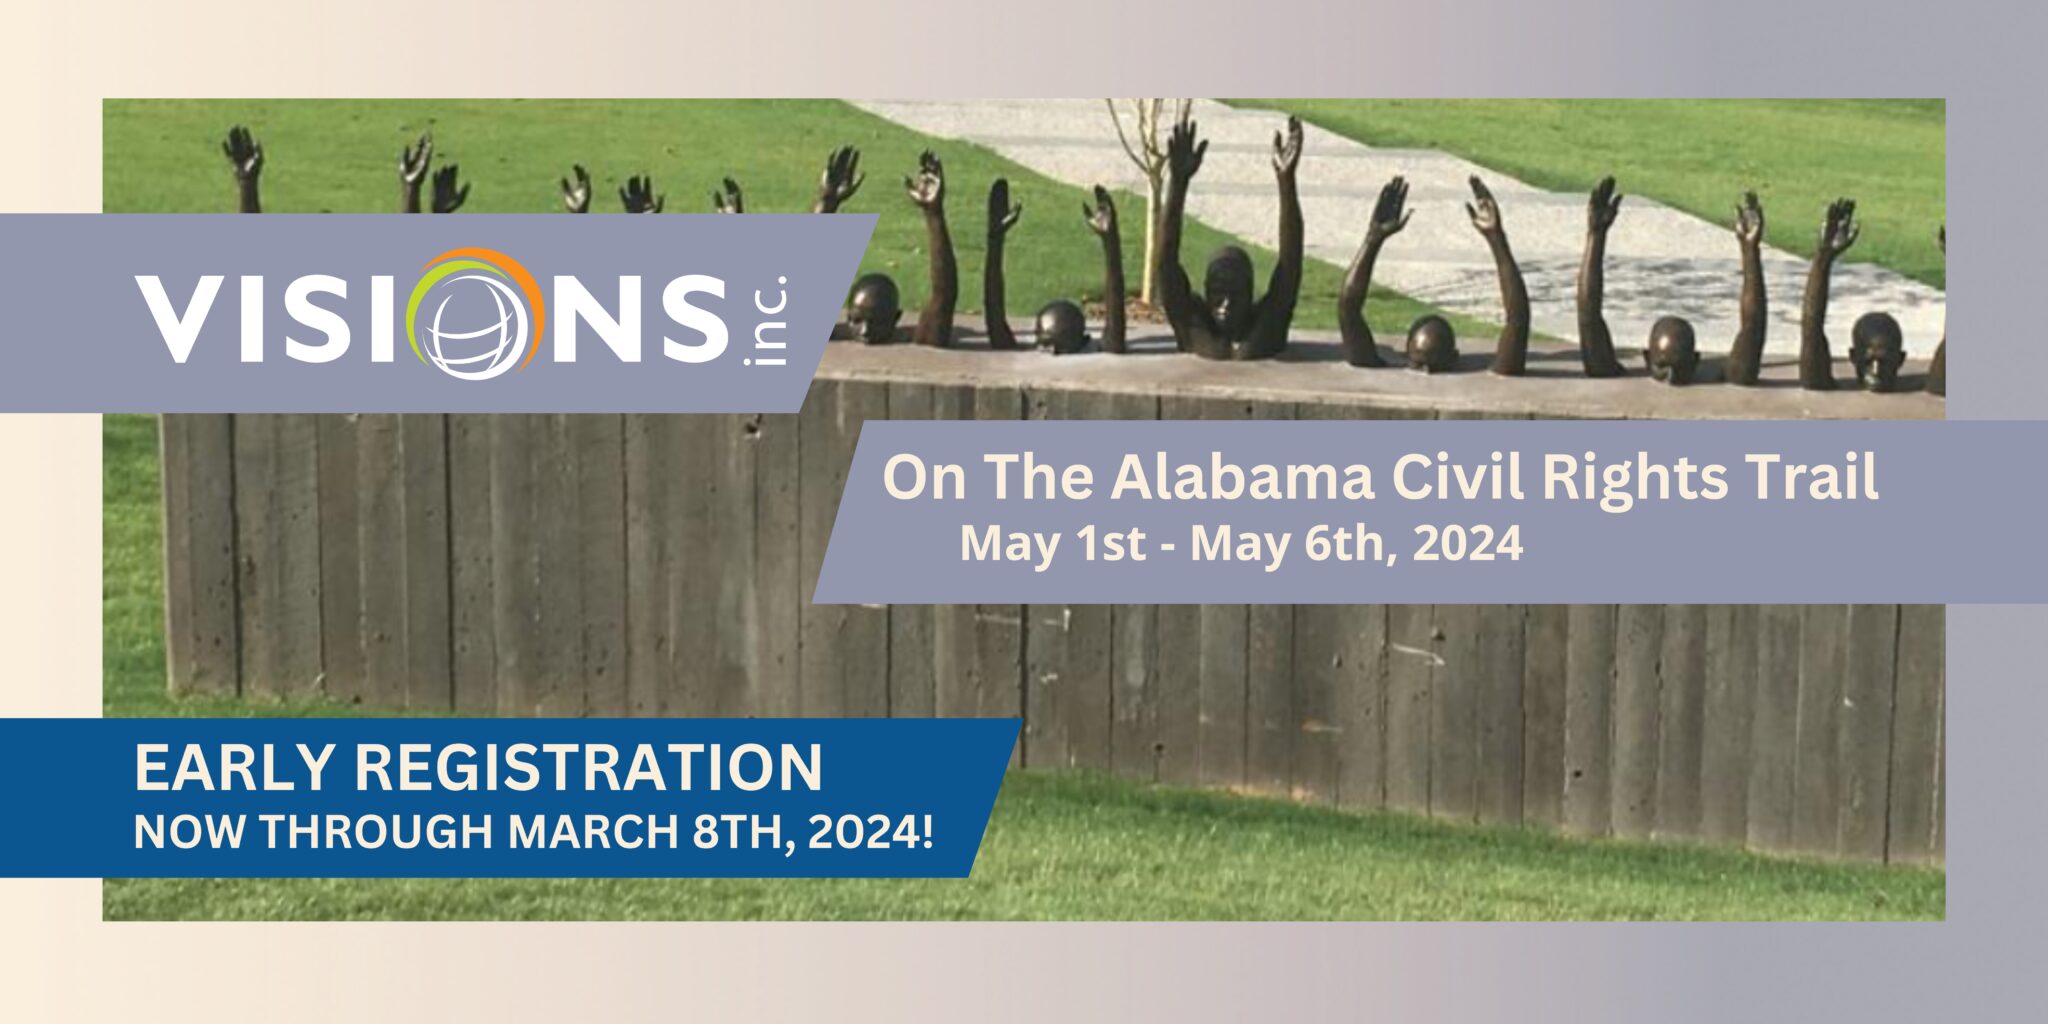 (Banner) On The Alabama Civil Rights Trail